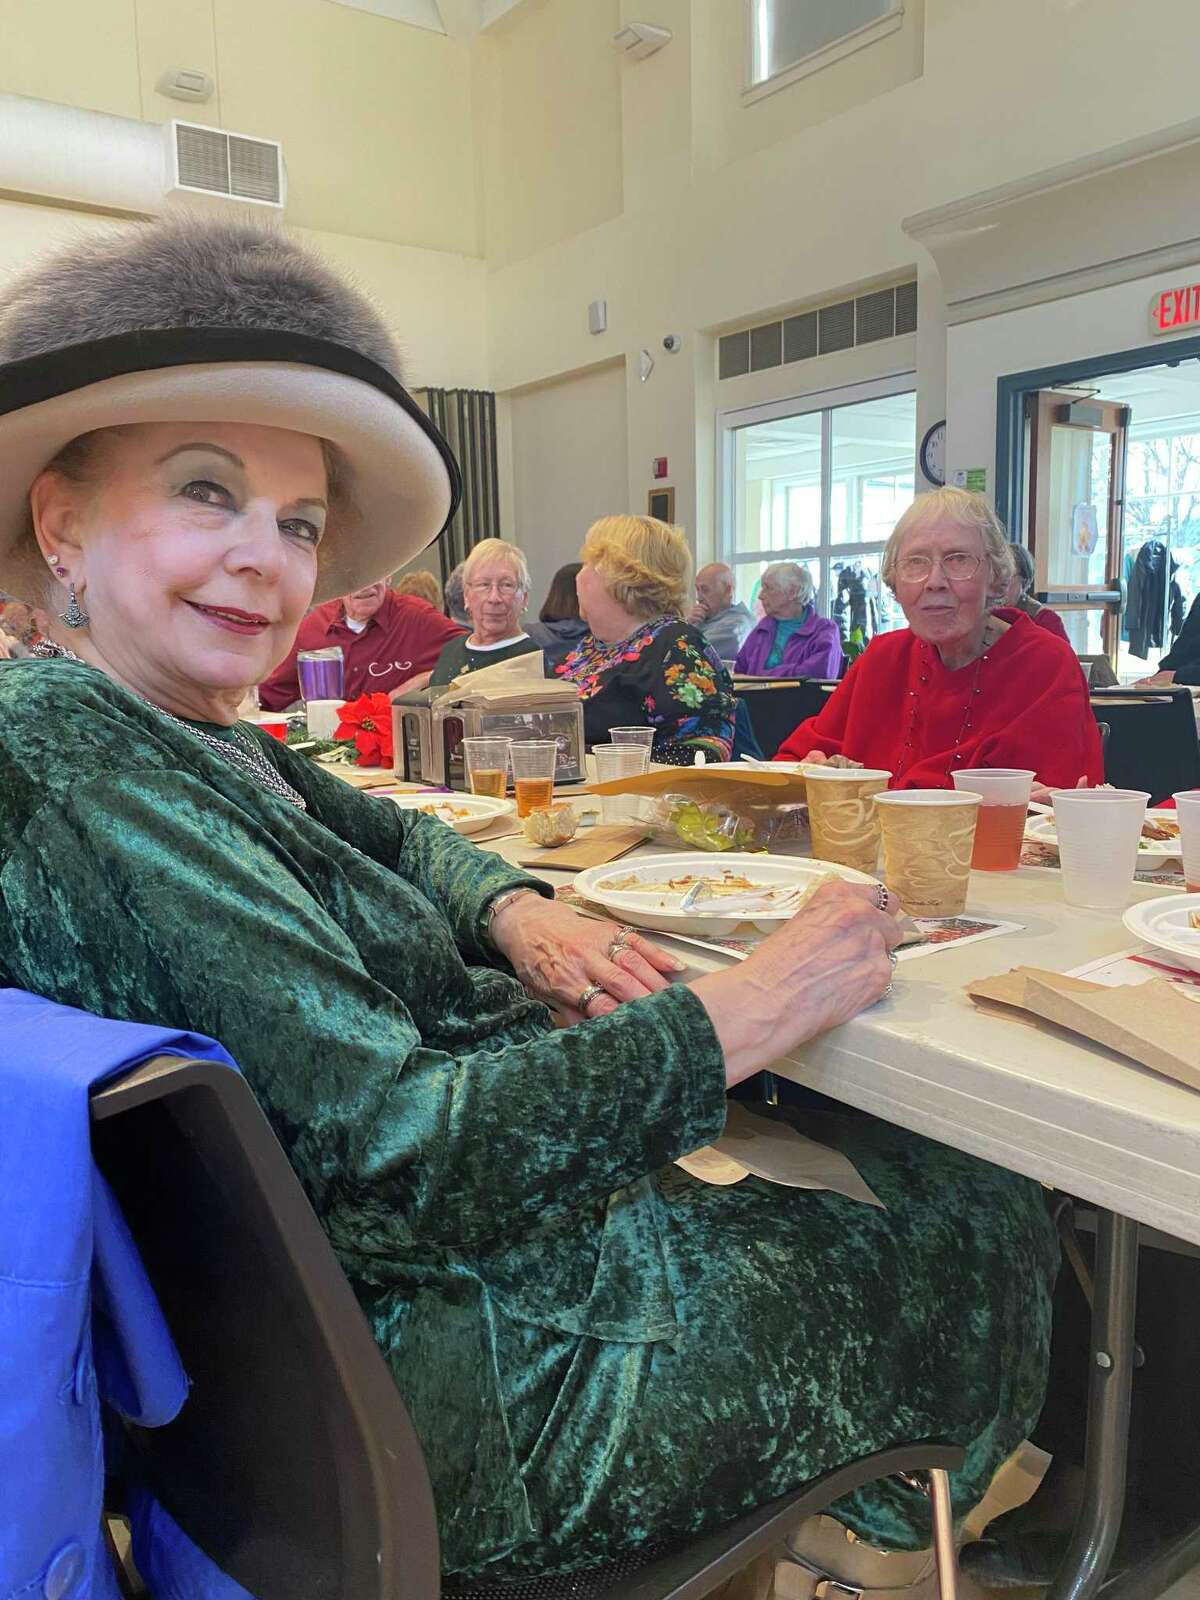 Lucille Jenkins, left, and Brenda Barber, in red, at the annual Guilford seniors’ Christmas lunch on Dec. 17, 2021.